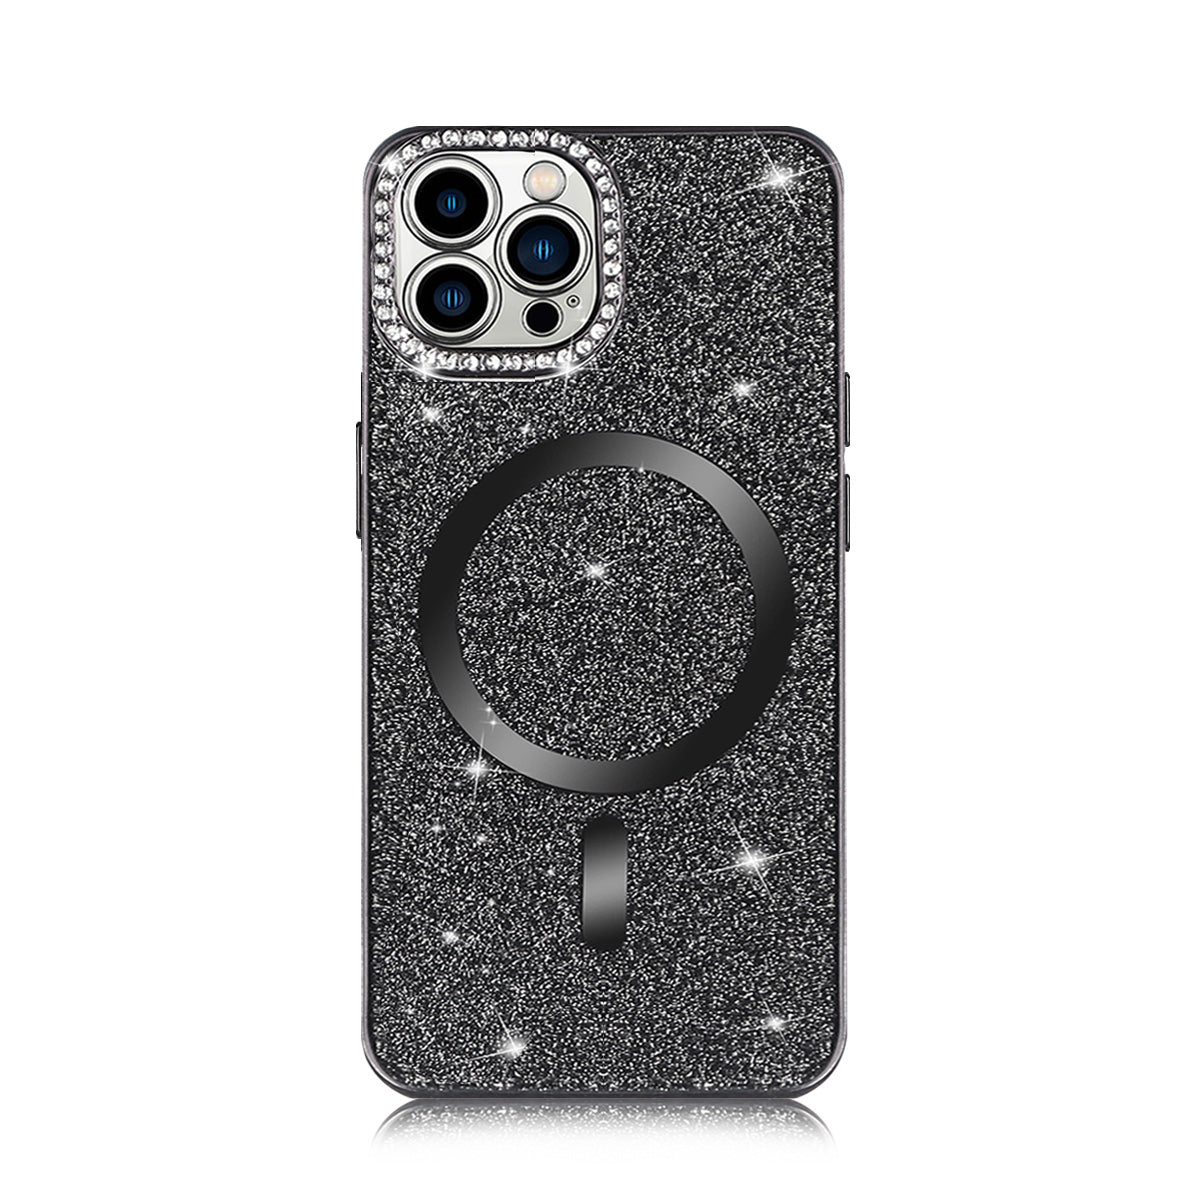 Glitter B&P Magnetic Charging iPhone Case